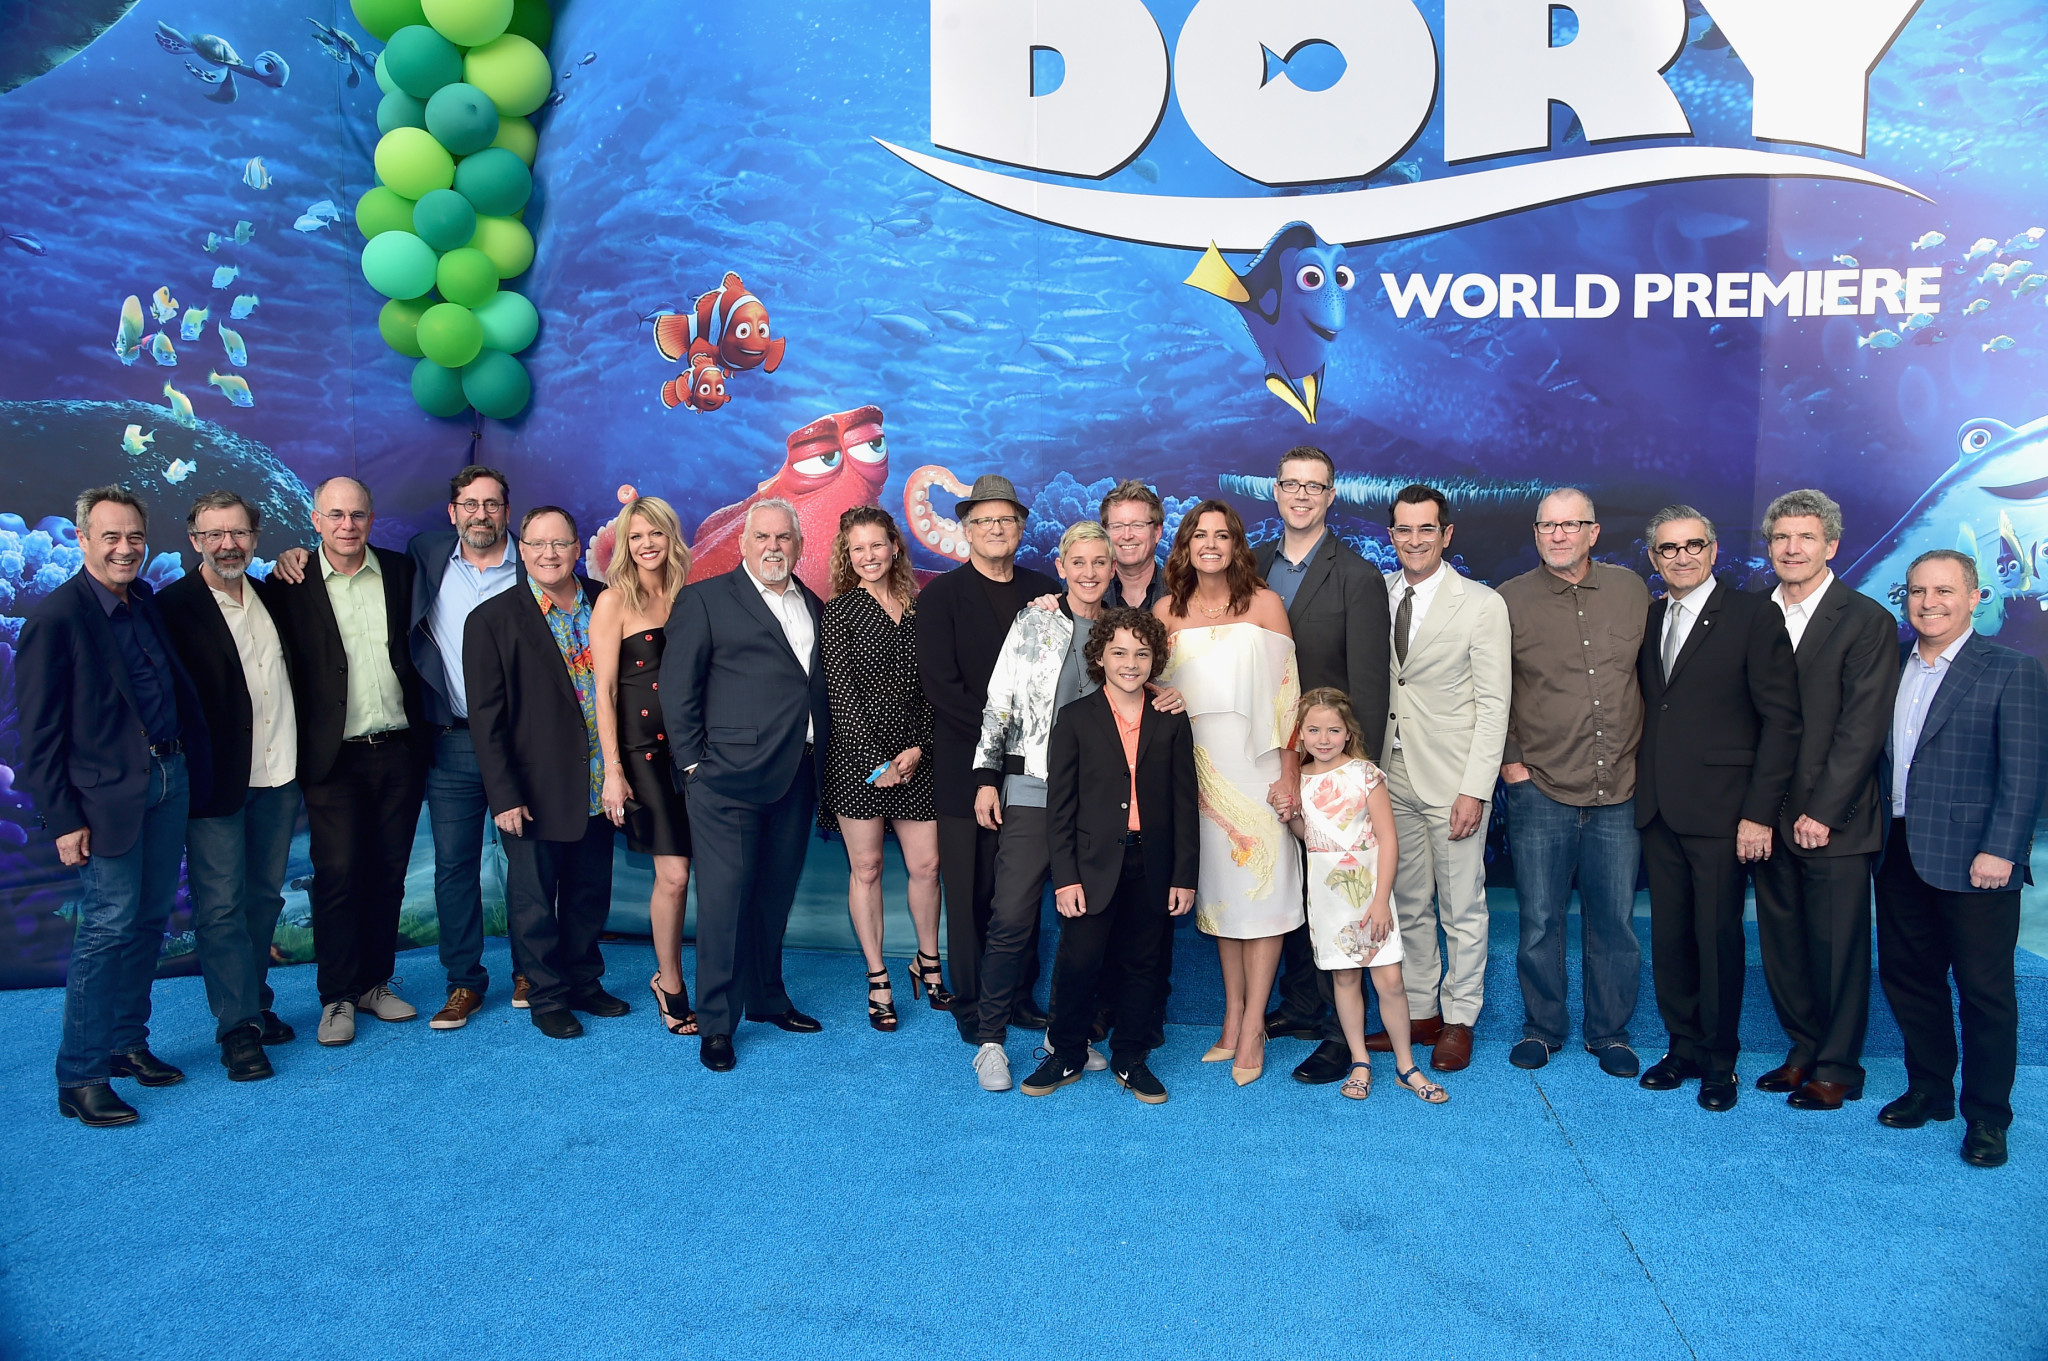 Finding Dory’s Red Carpet Premiere